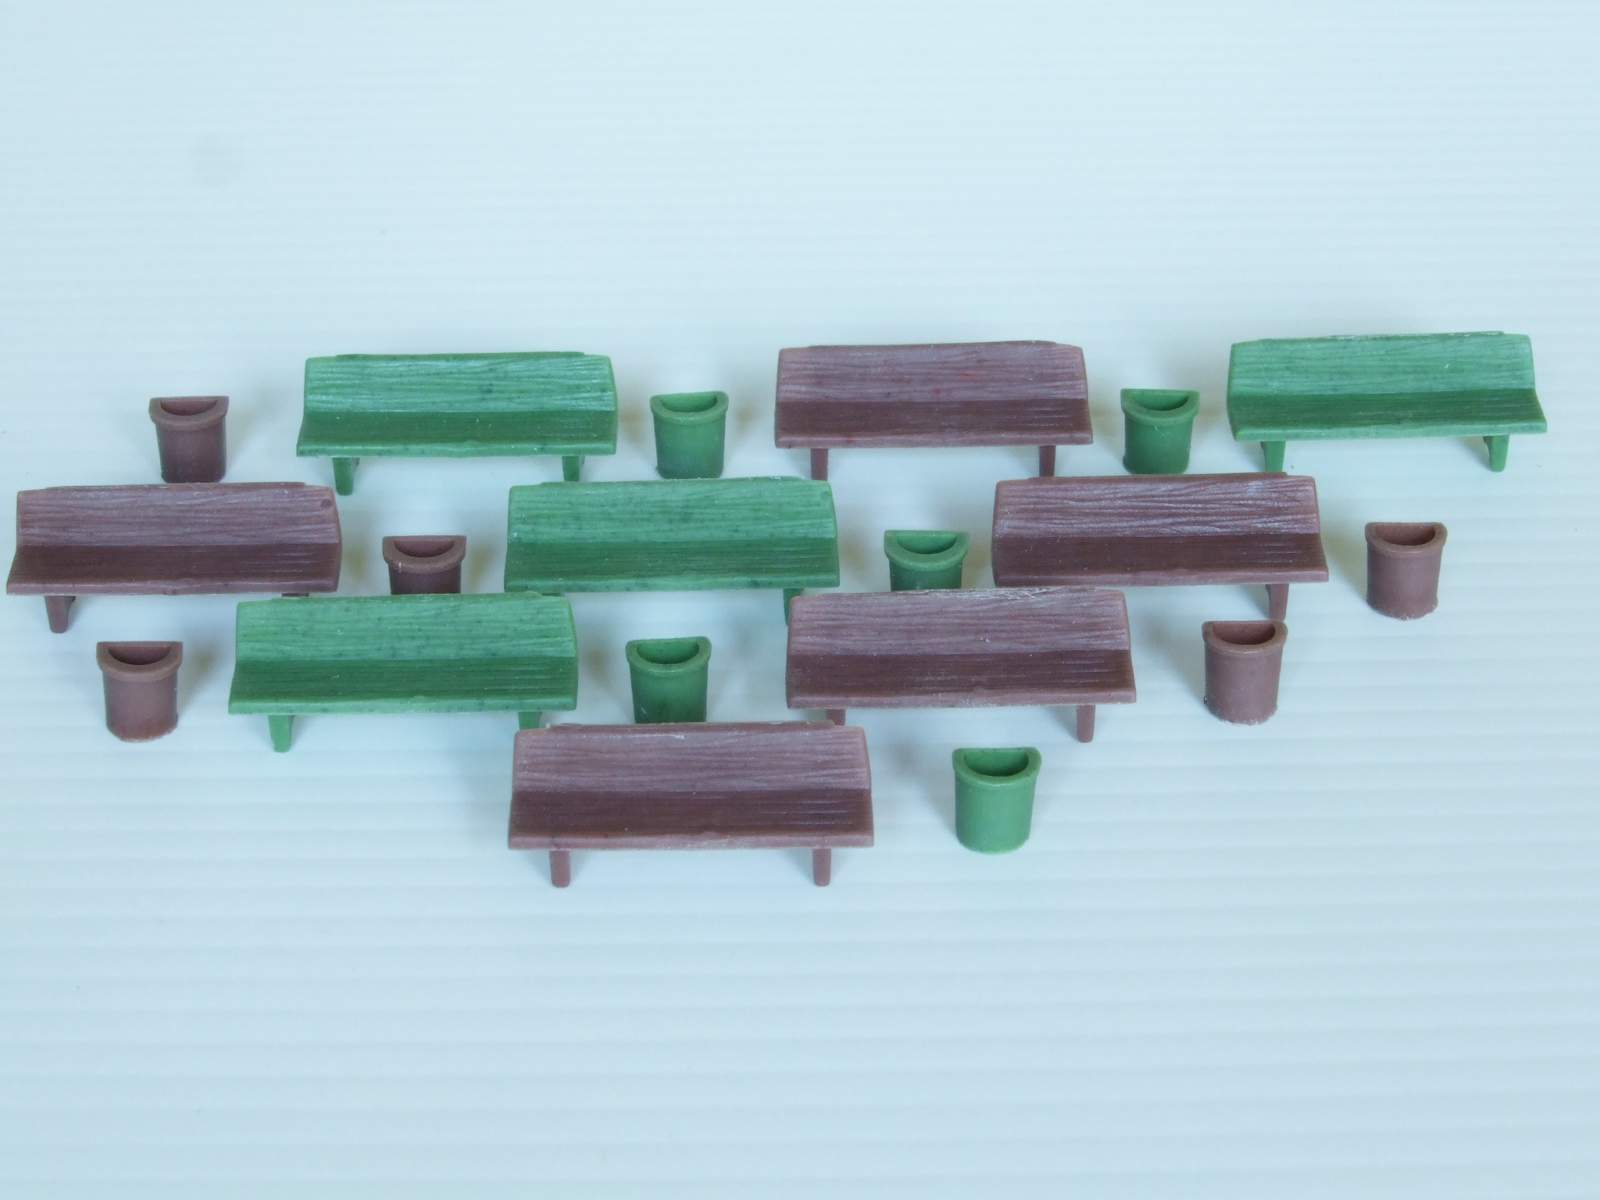 1:87-H0 12 benches for model making + 12 baskets in two colors - Krea